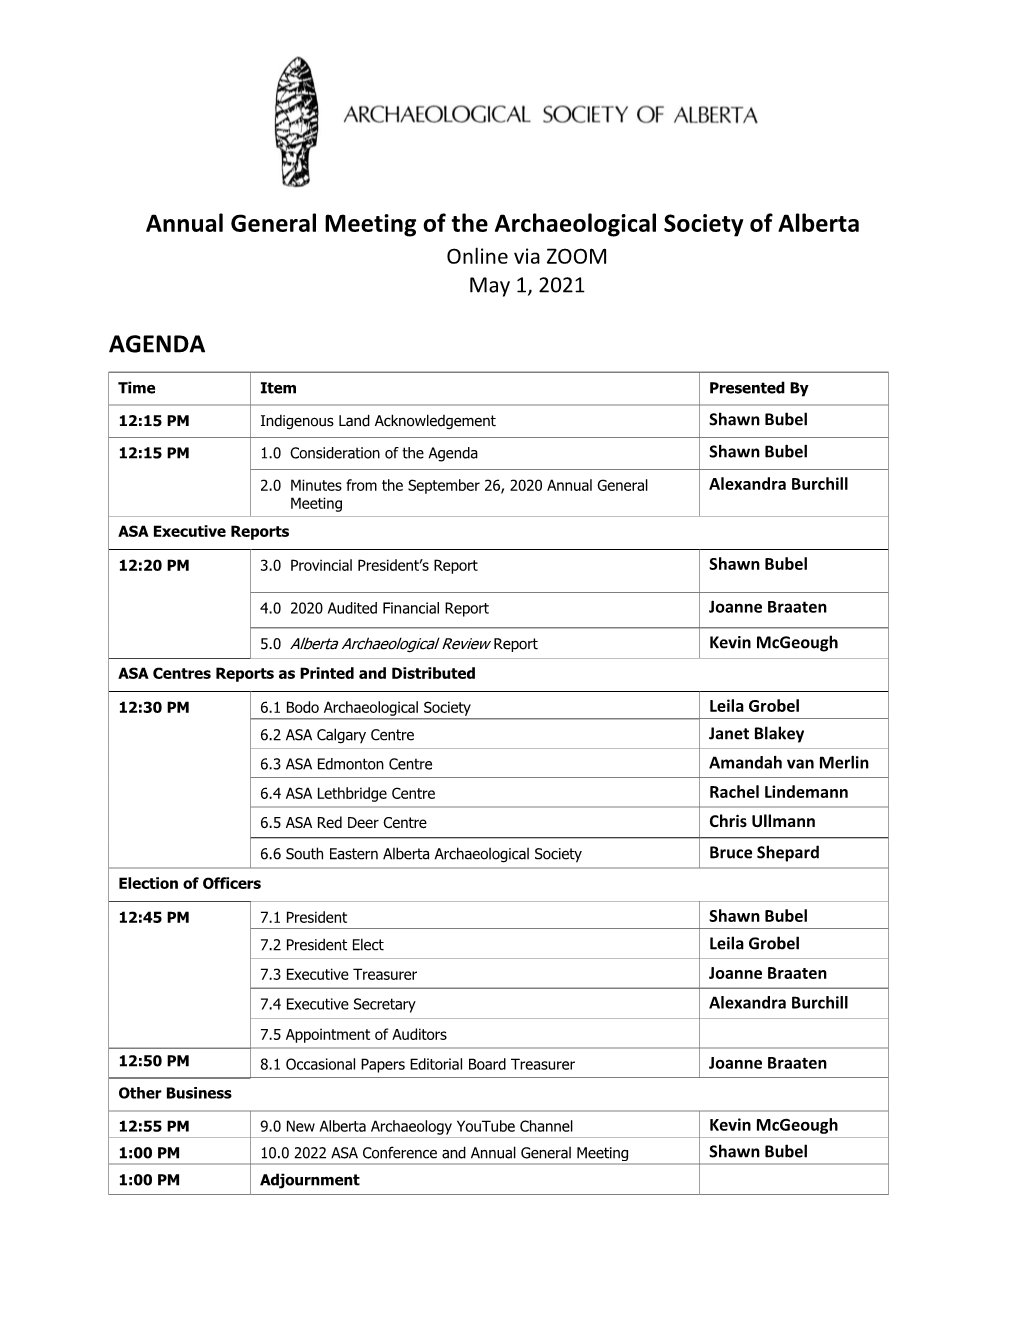 Annual General Meeting of the Archaeological Society of Alberta Online Via ZOOM May 1, 2021